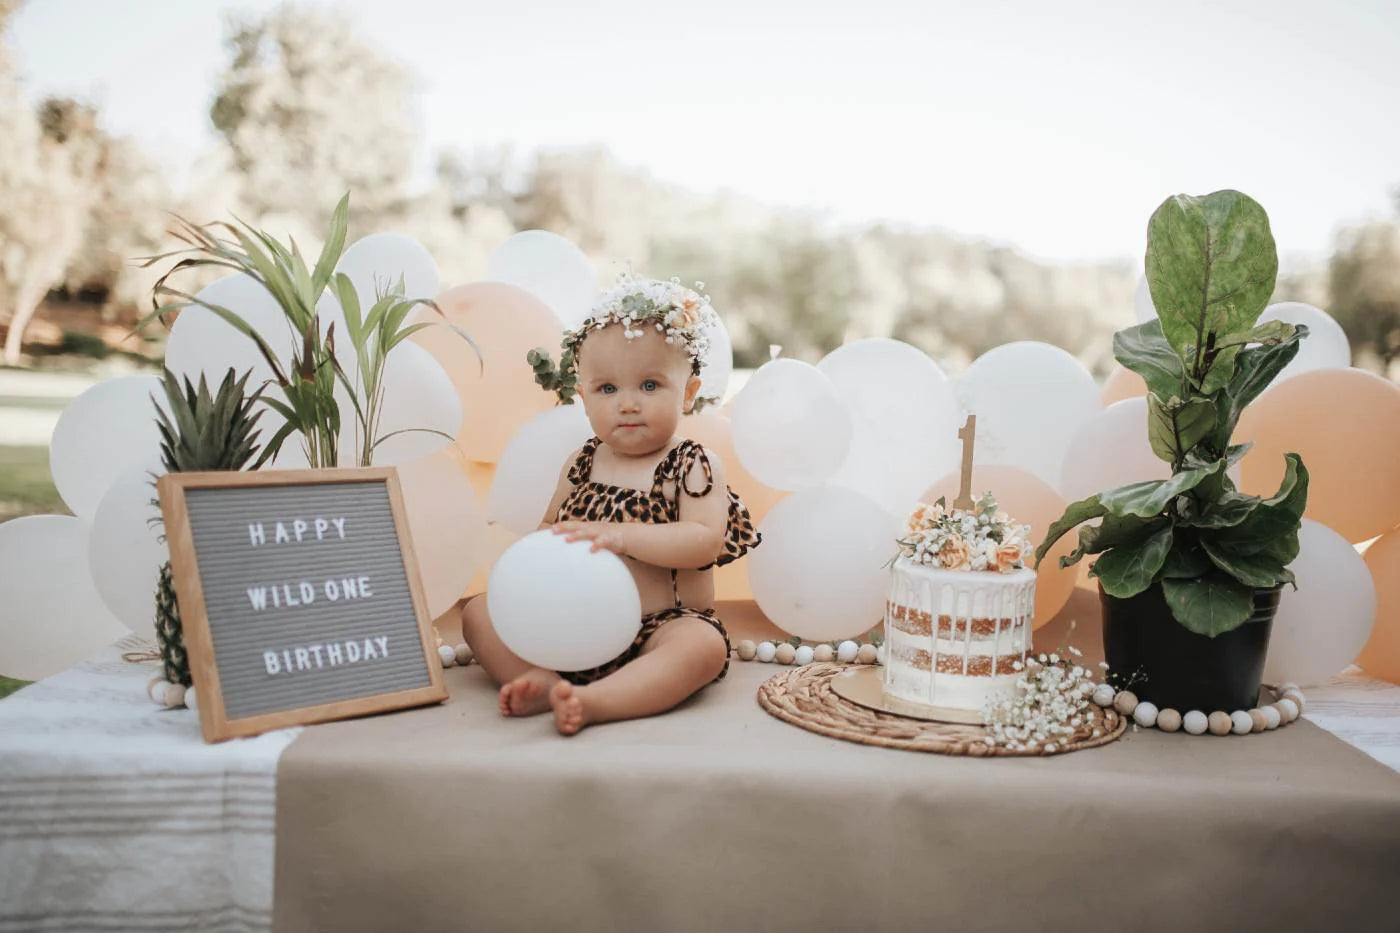 Choosing the Perfect Theme for Your Child's 1st Birthday Party